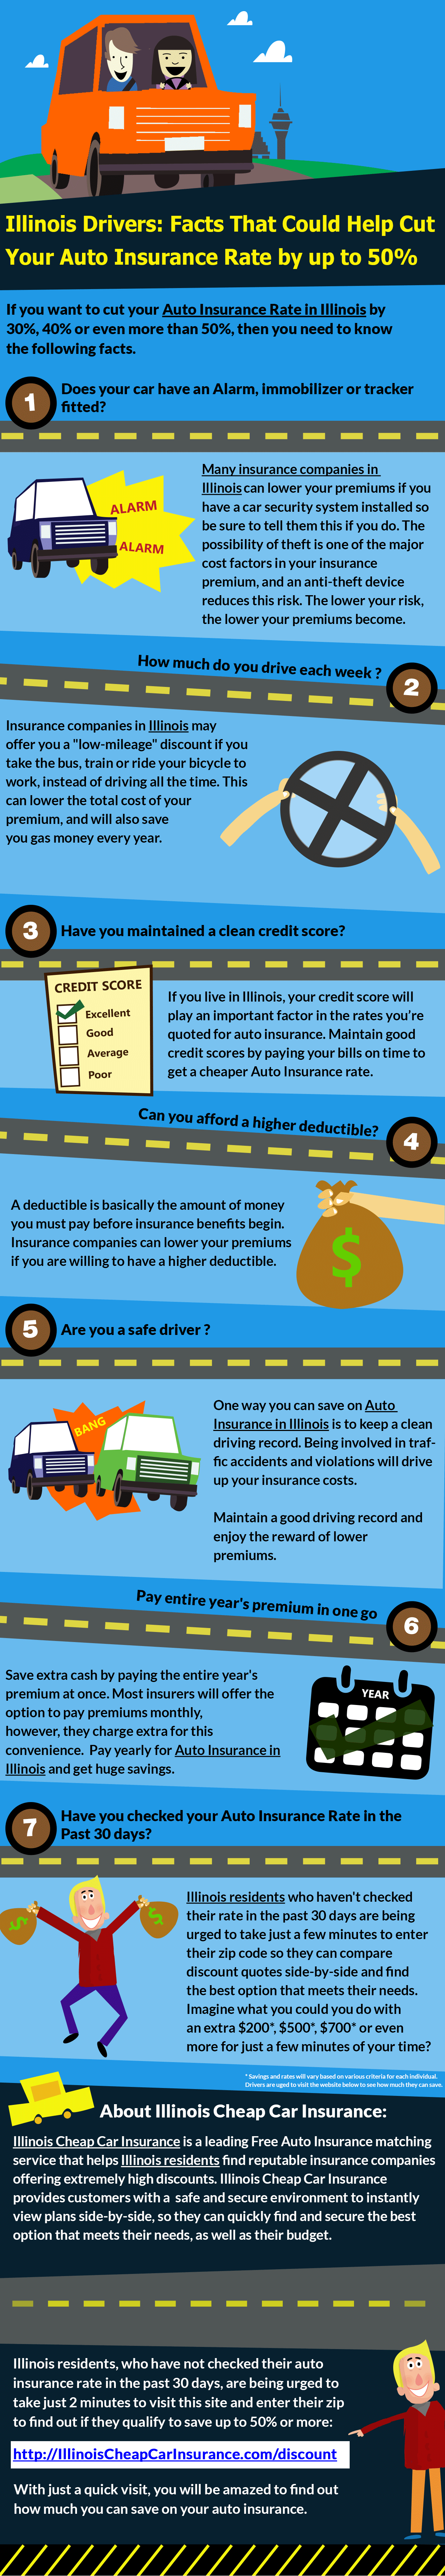 Illinois Auto Insurance - Save up to 50% or more on your auto insurance in Illinois.... Infographic